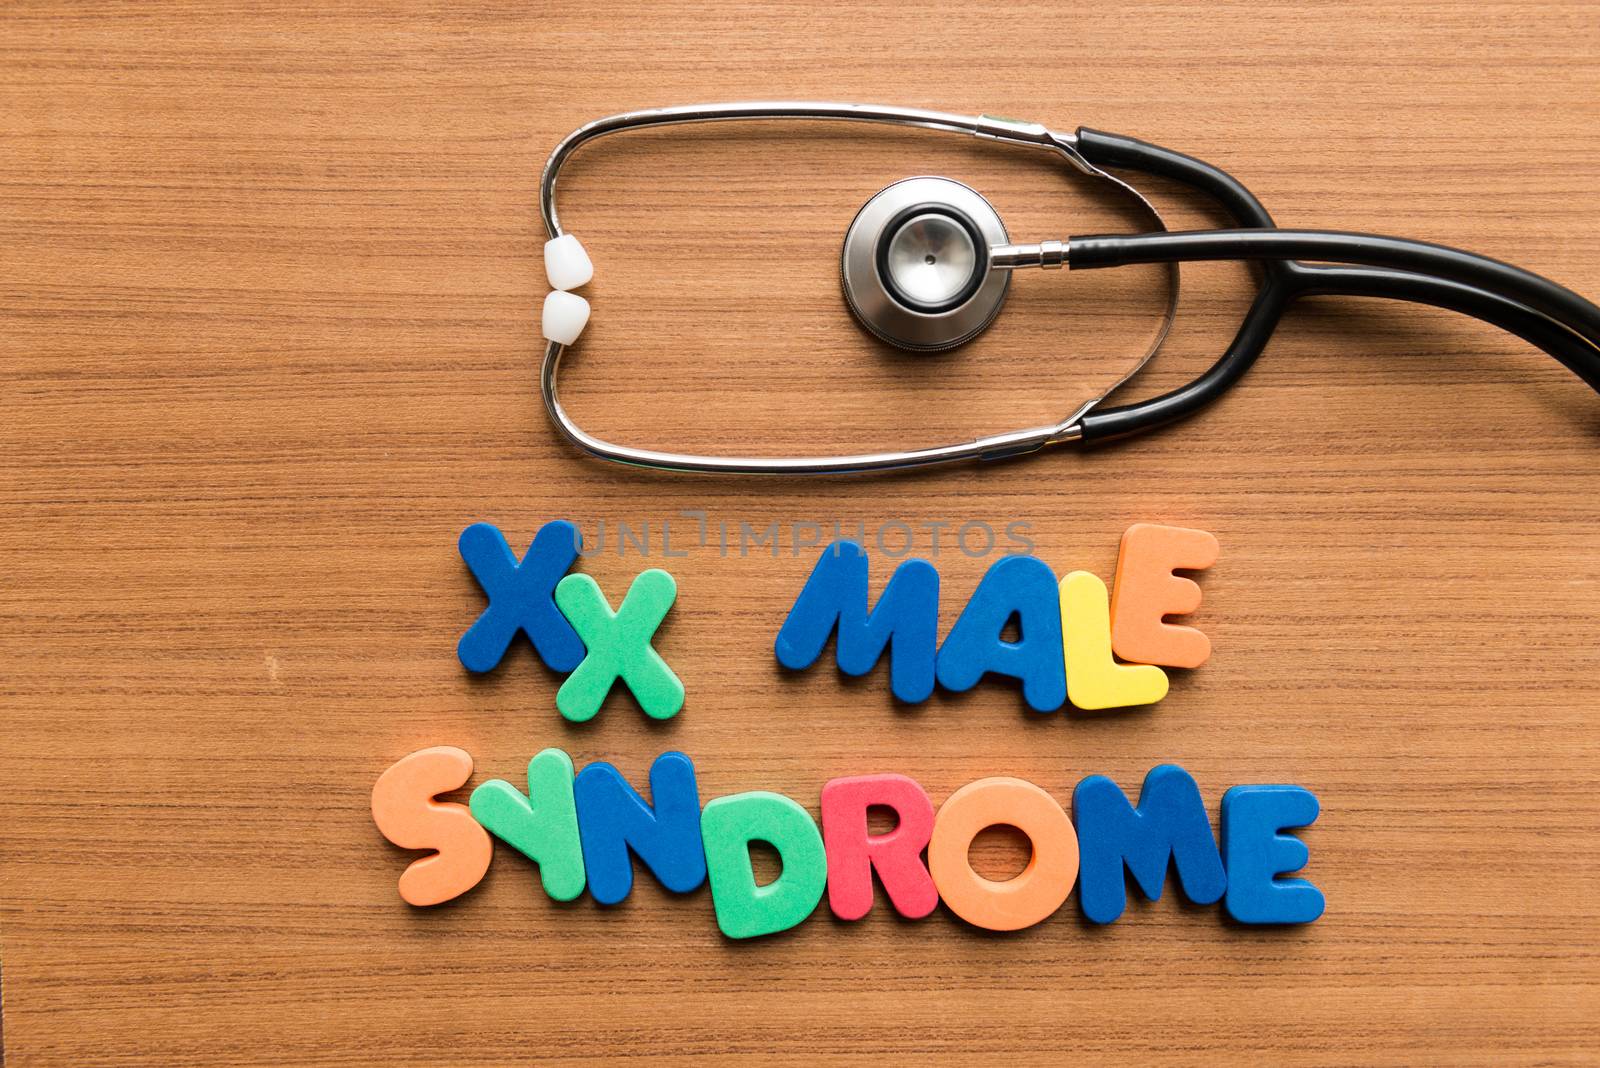 xx male syndrome colorful word with stethoscope on wooden background